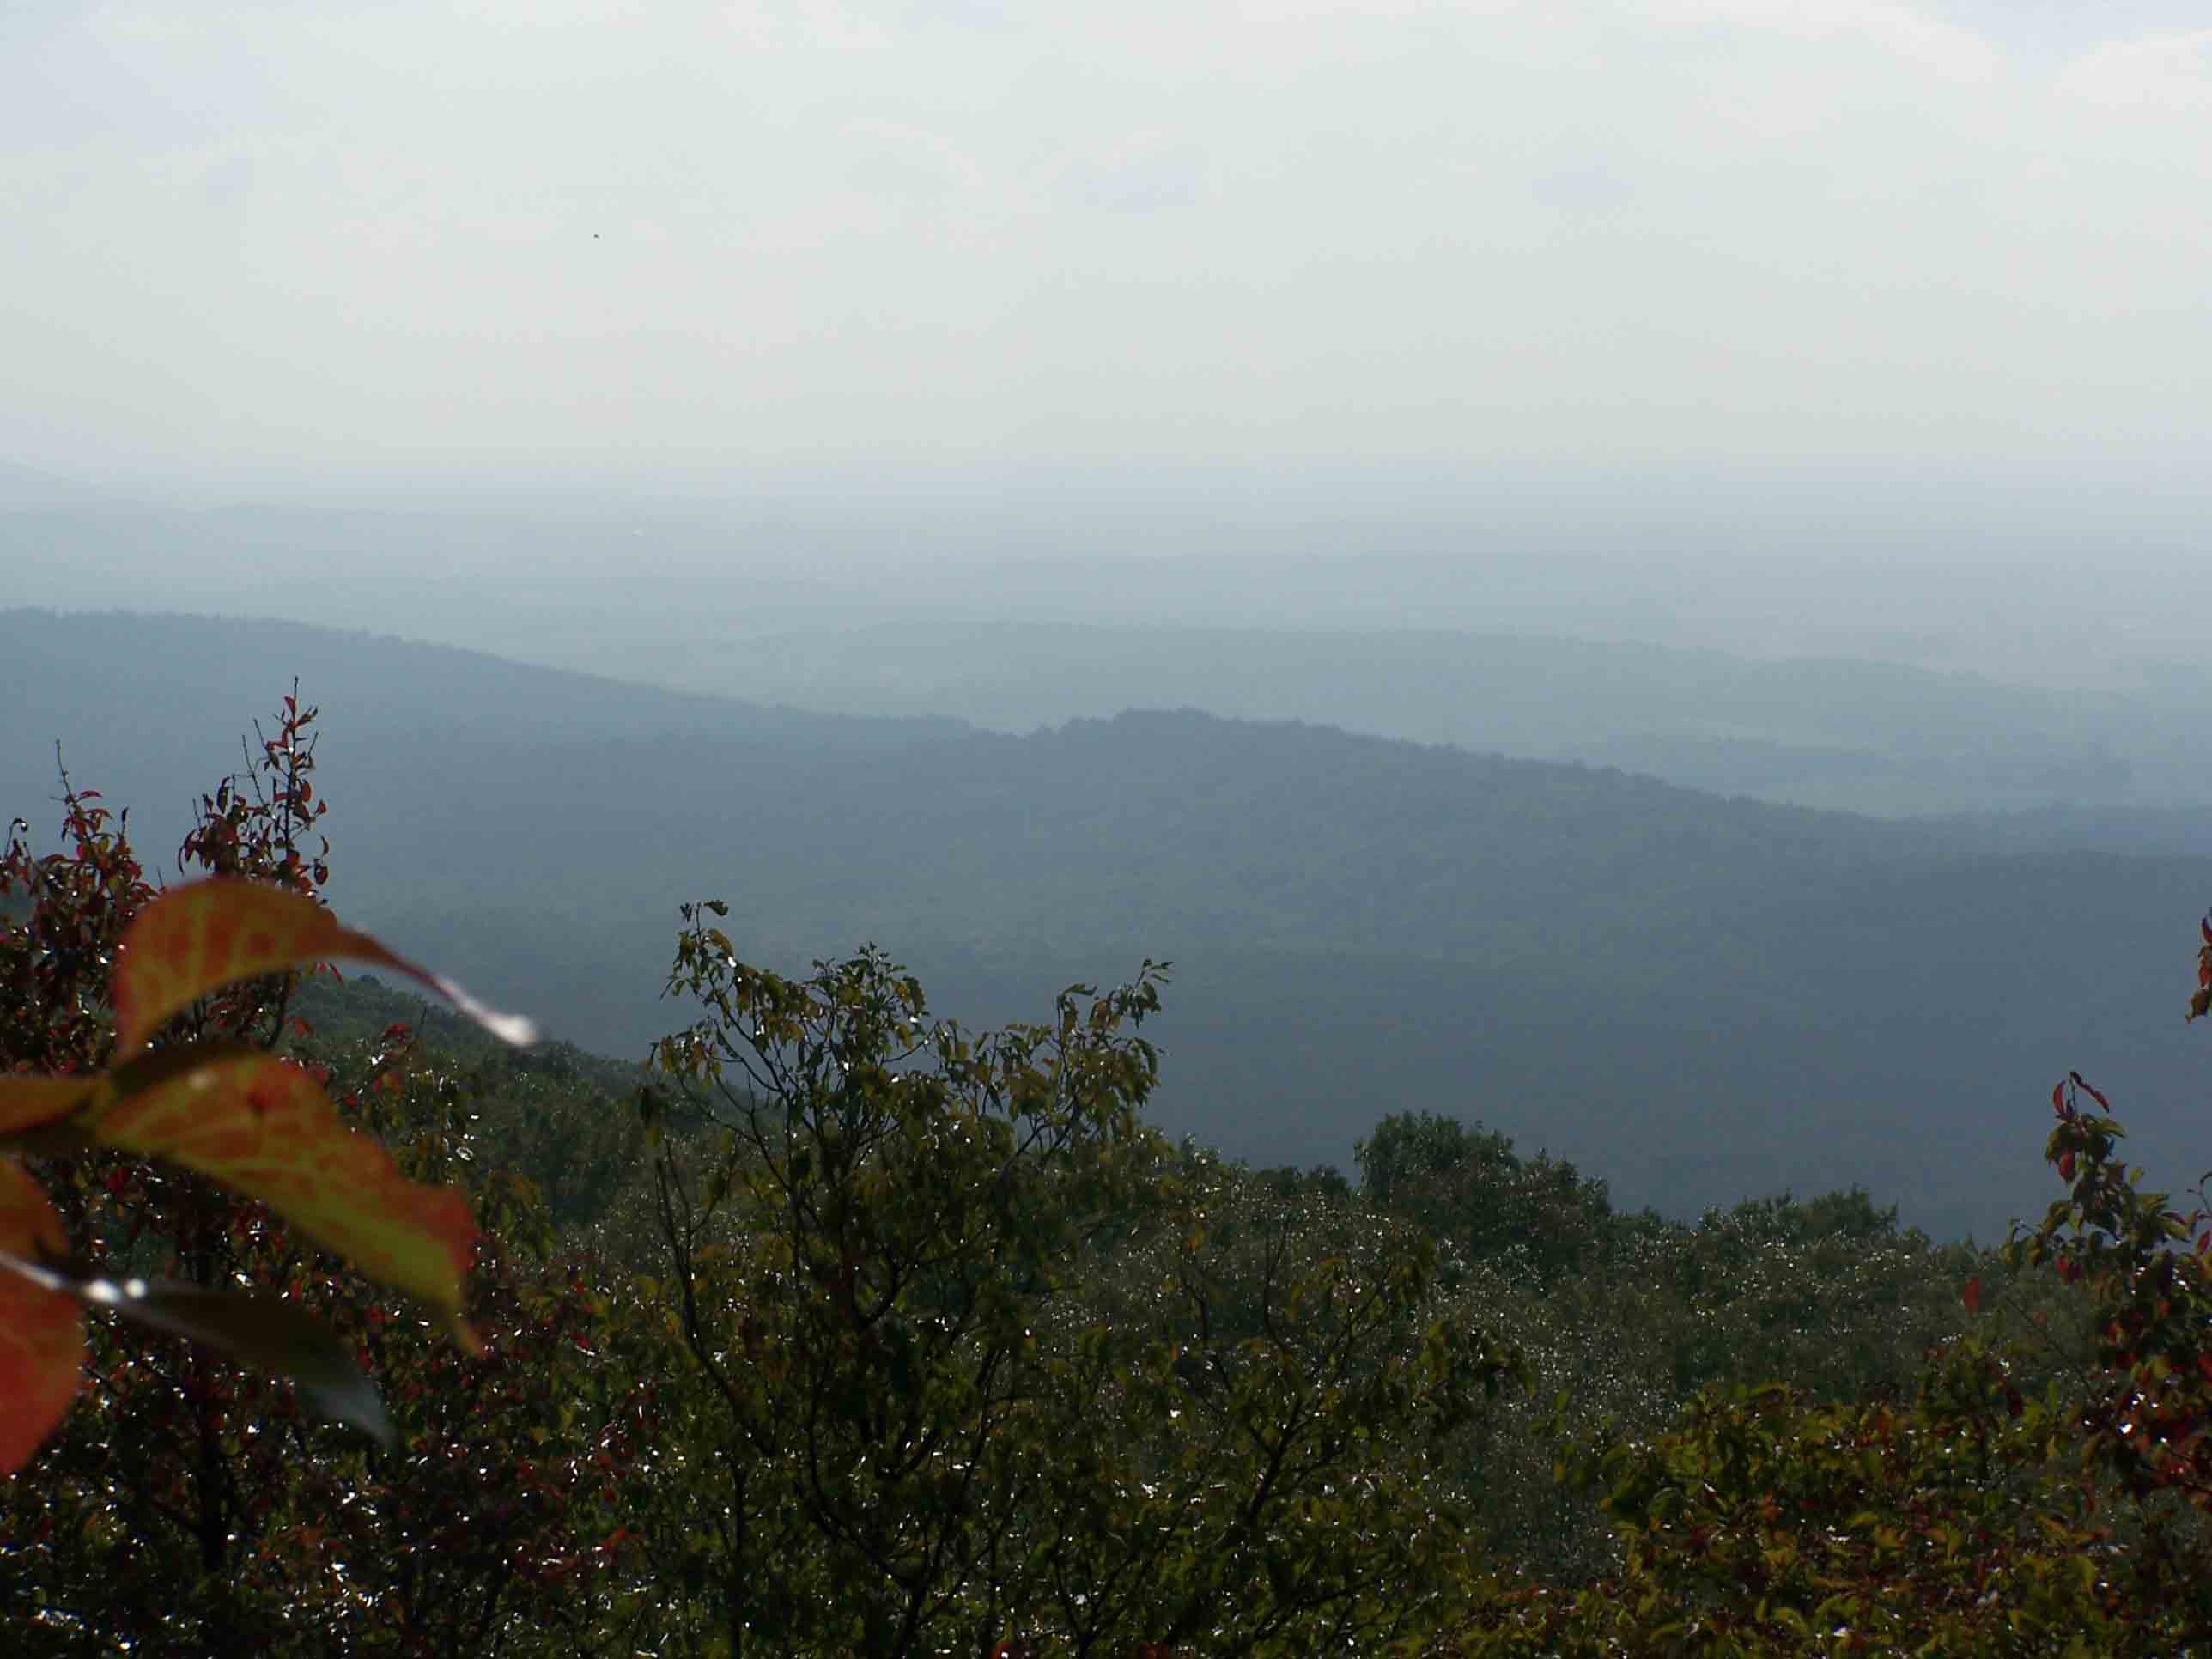 mm 3.6 - View from Buzzard Rocks. Courtesy at@rohland.org